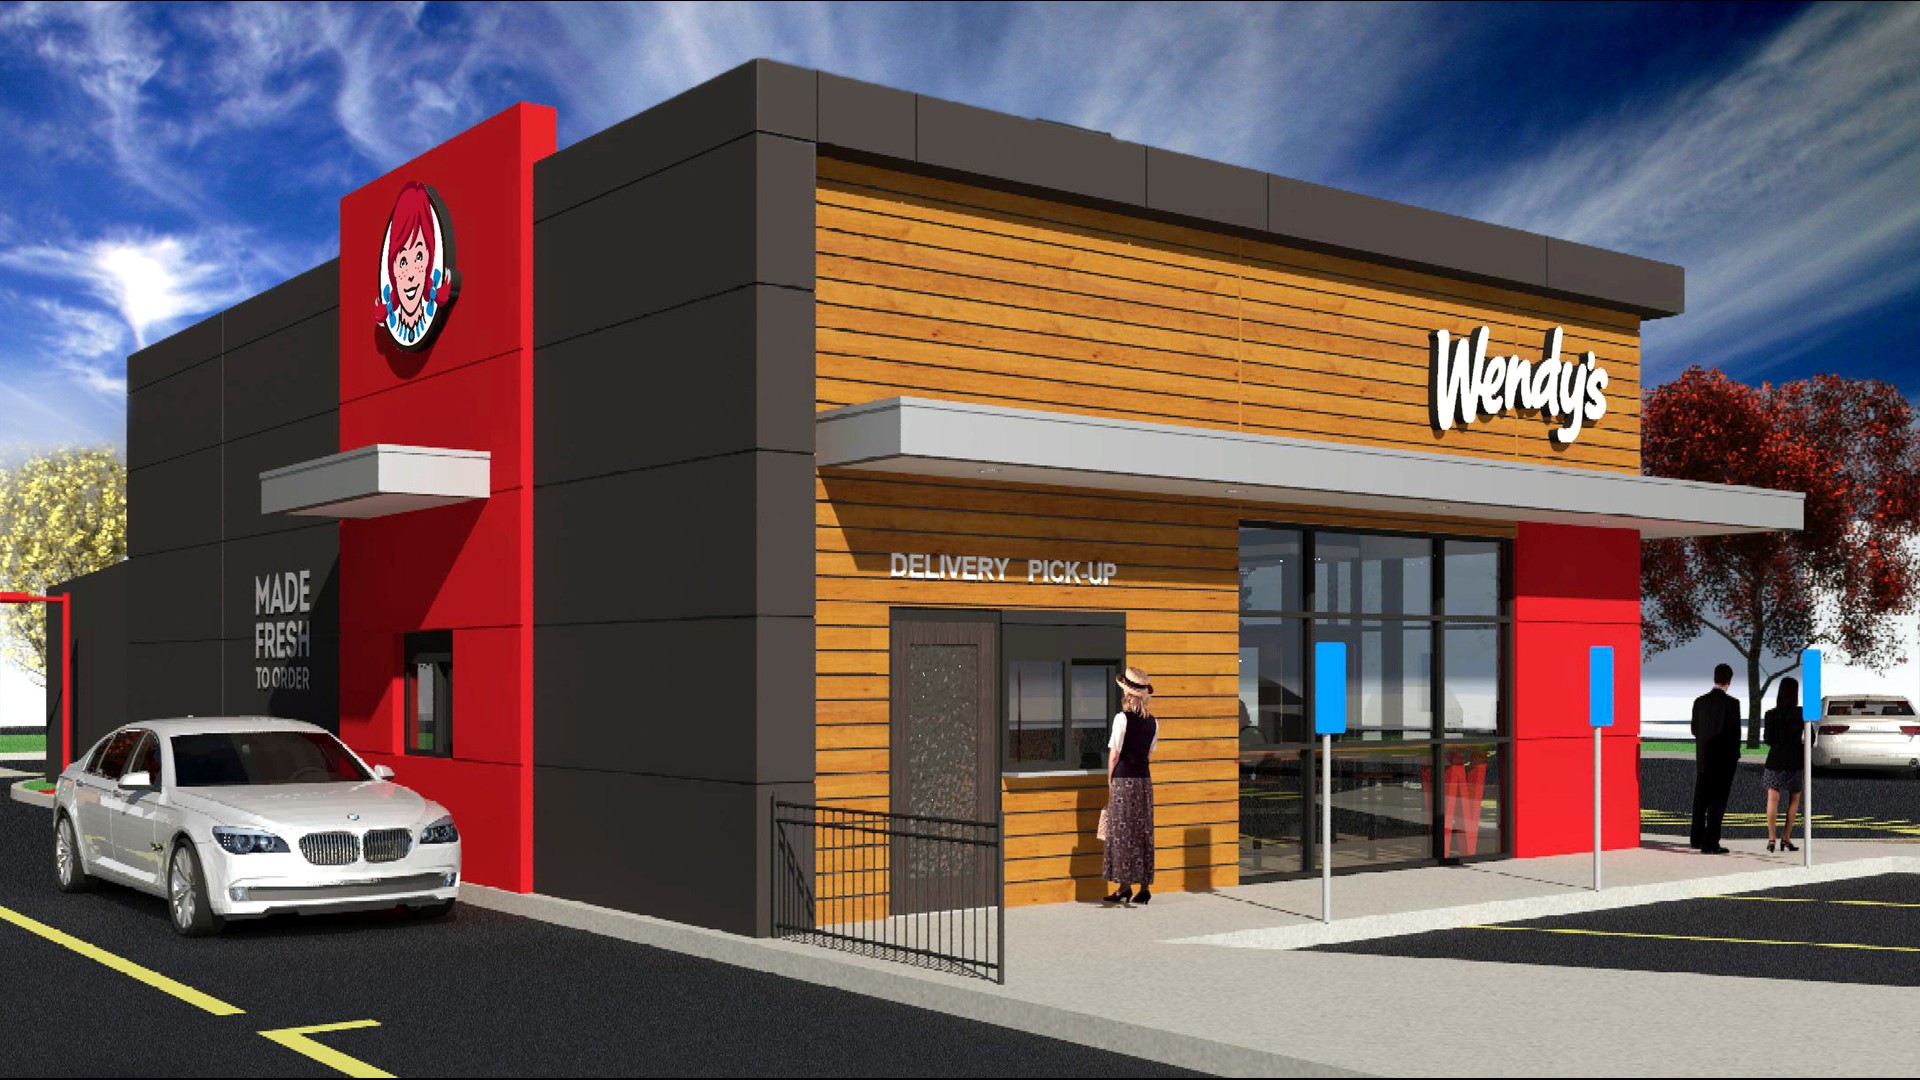 The first Wendy's restaurant with a new global design will open in New Albany in 2023